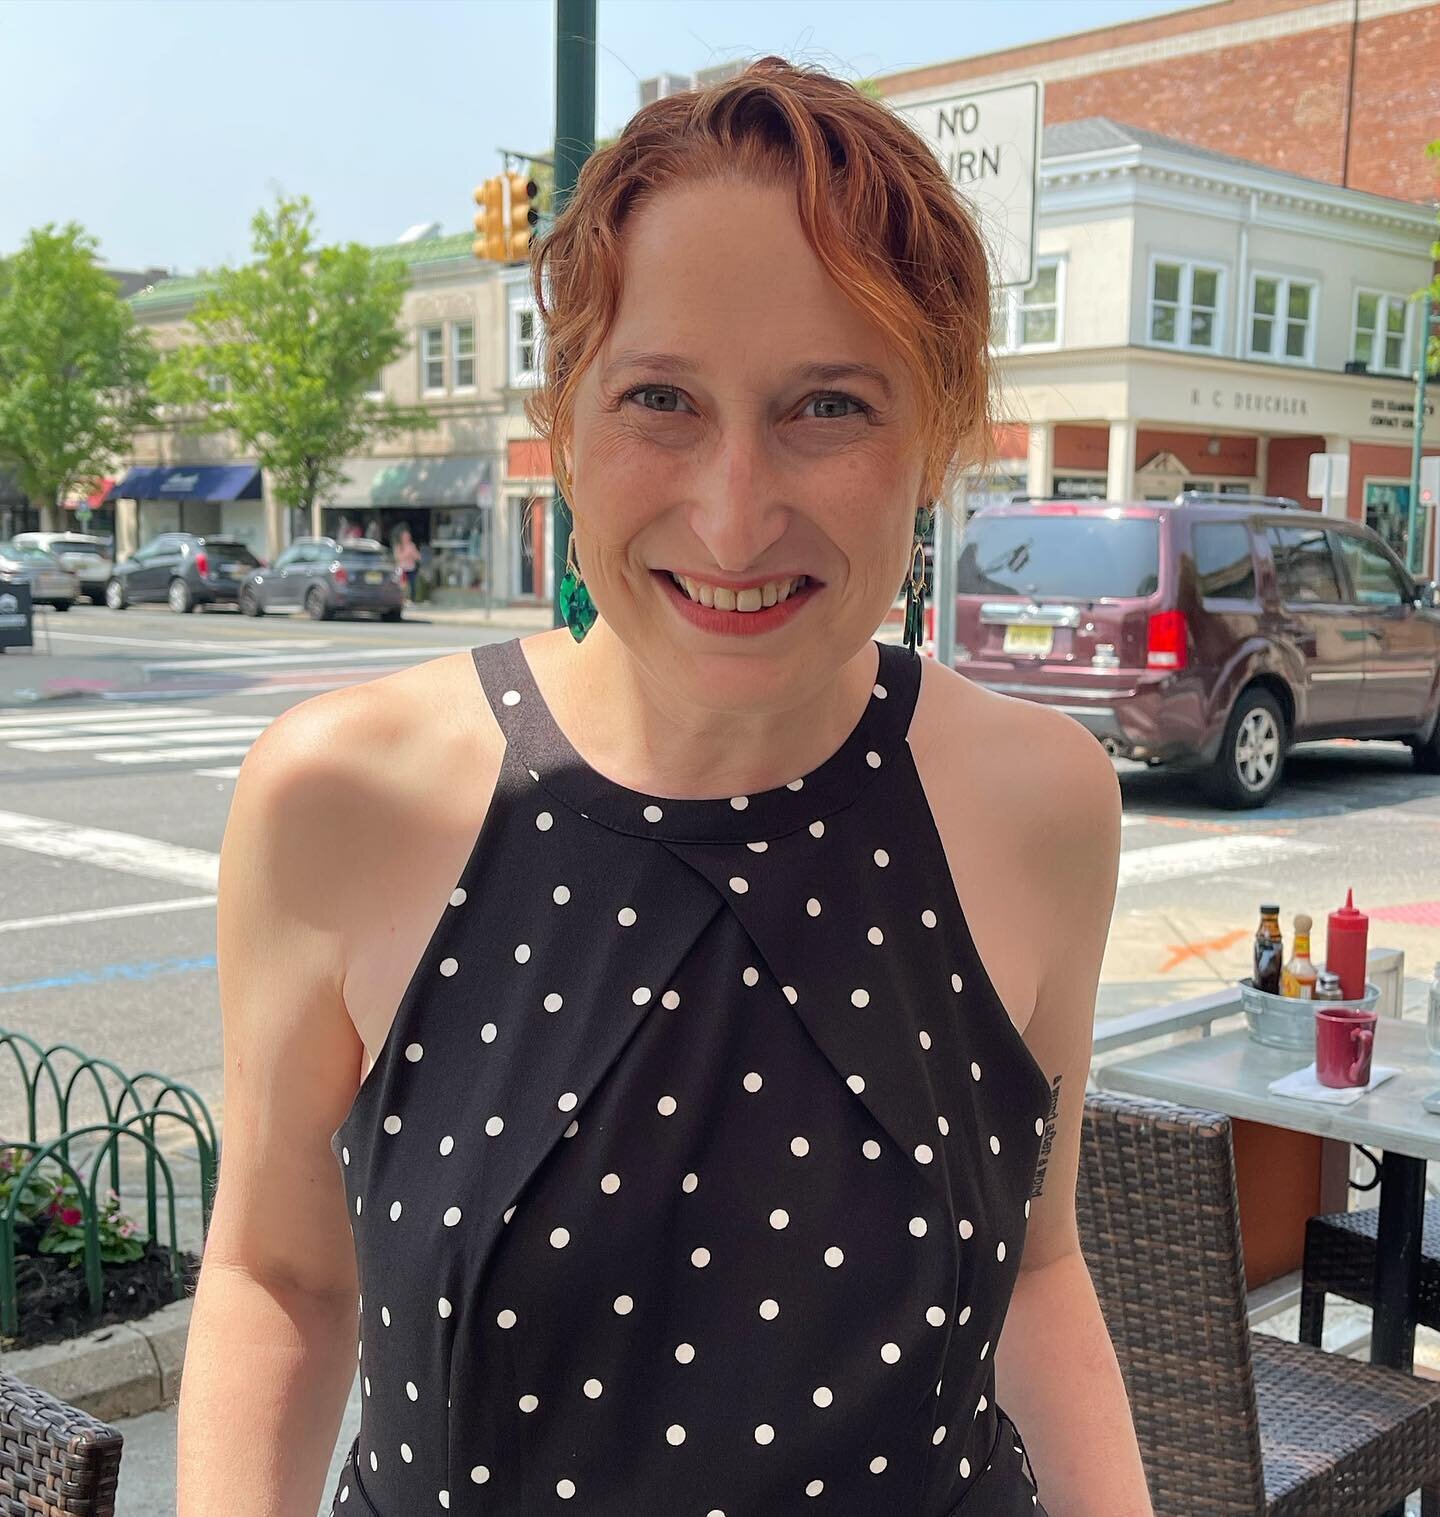 Happy birthday to me! Instead of middle-aged, let&rsquo;s call 46 half-baked. 
Today I was gifted with lots of love, beautiful weather, and a hot flash, as if I needed reminding about perimenopause.
Aging is a privilege and a pain in the ass. 
#perim